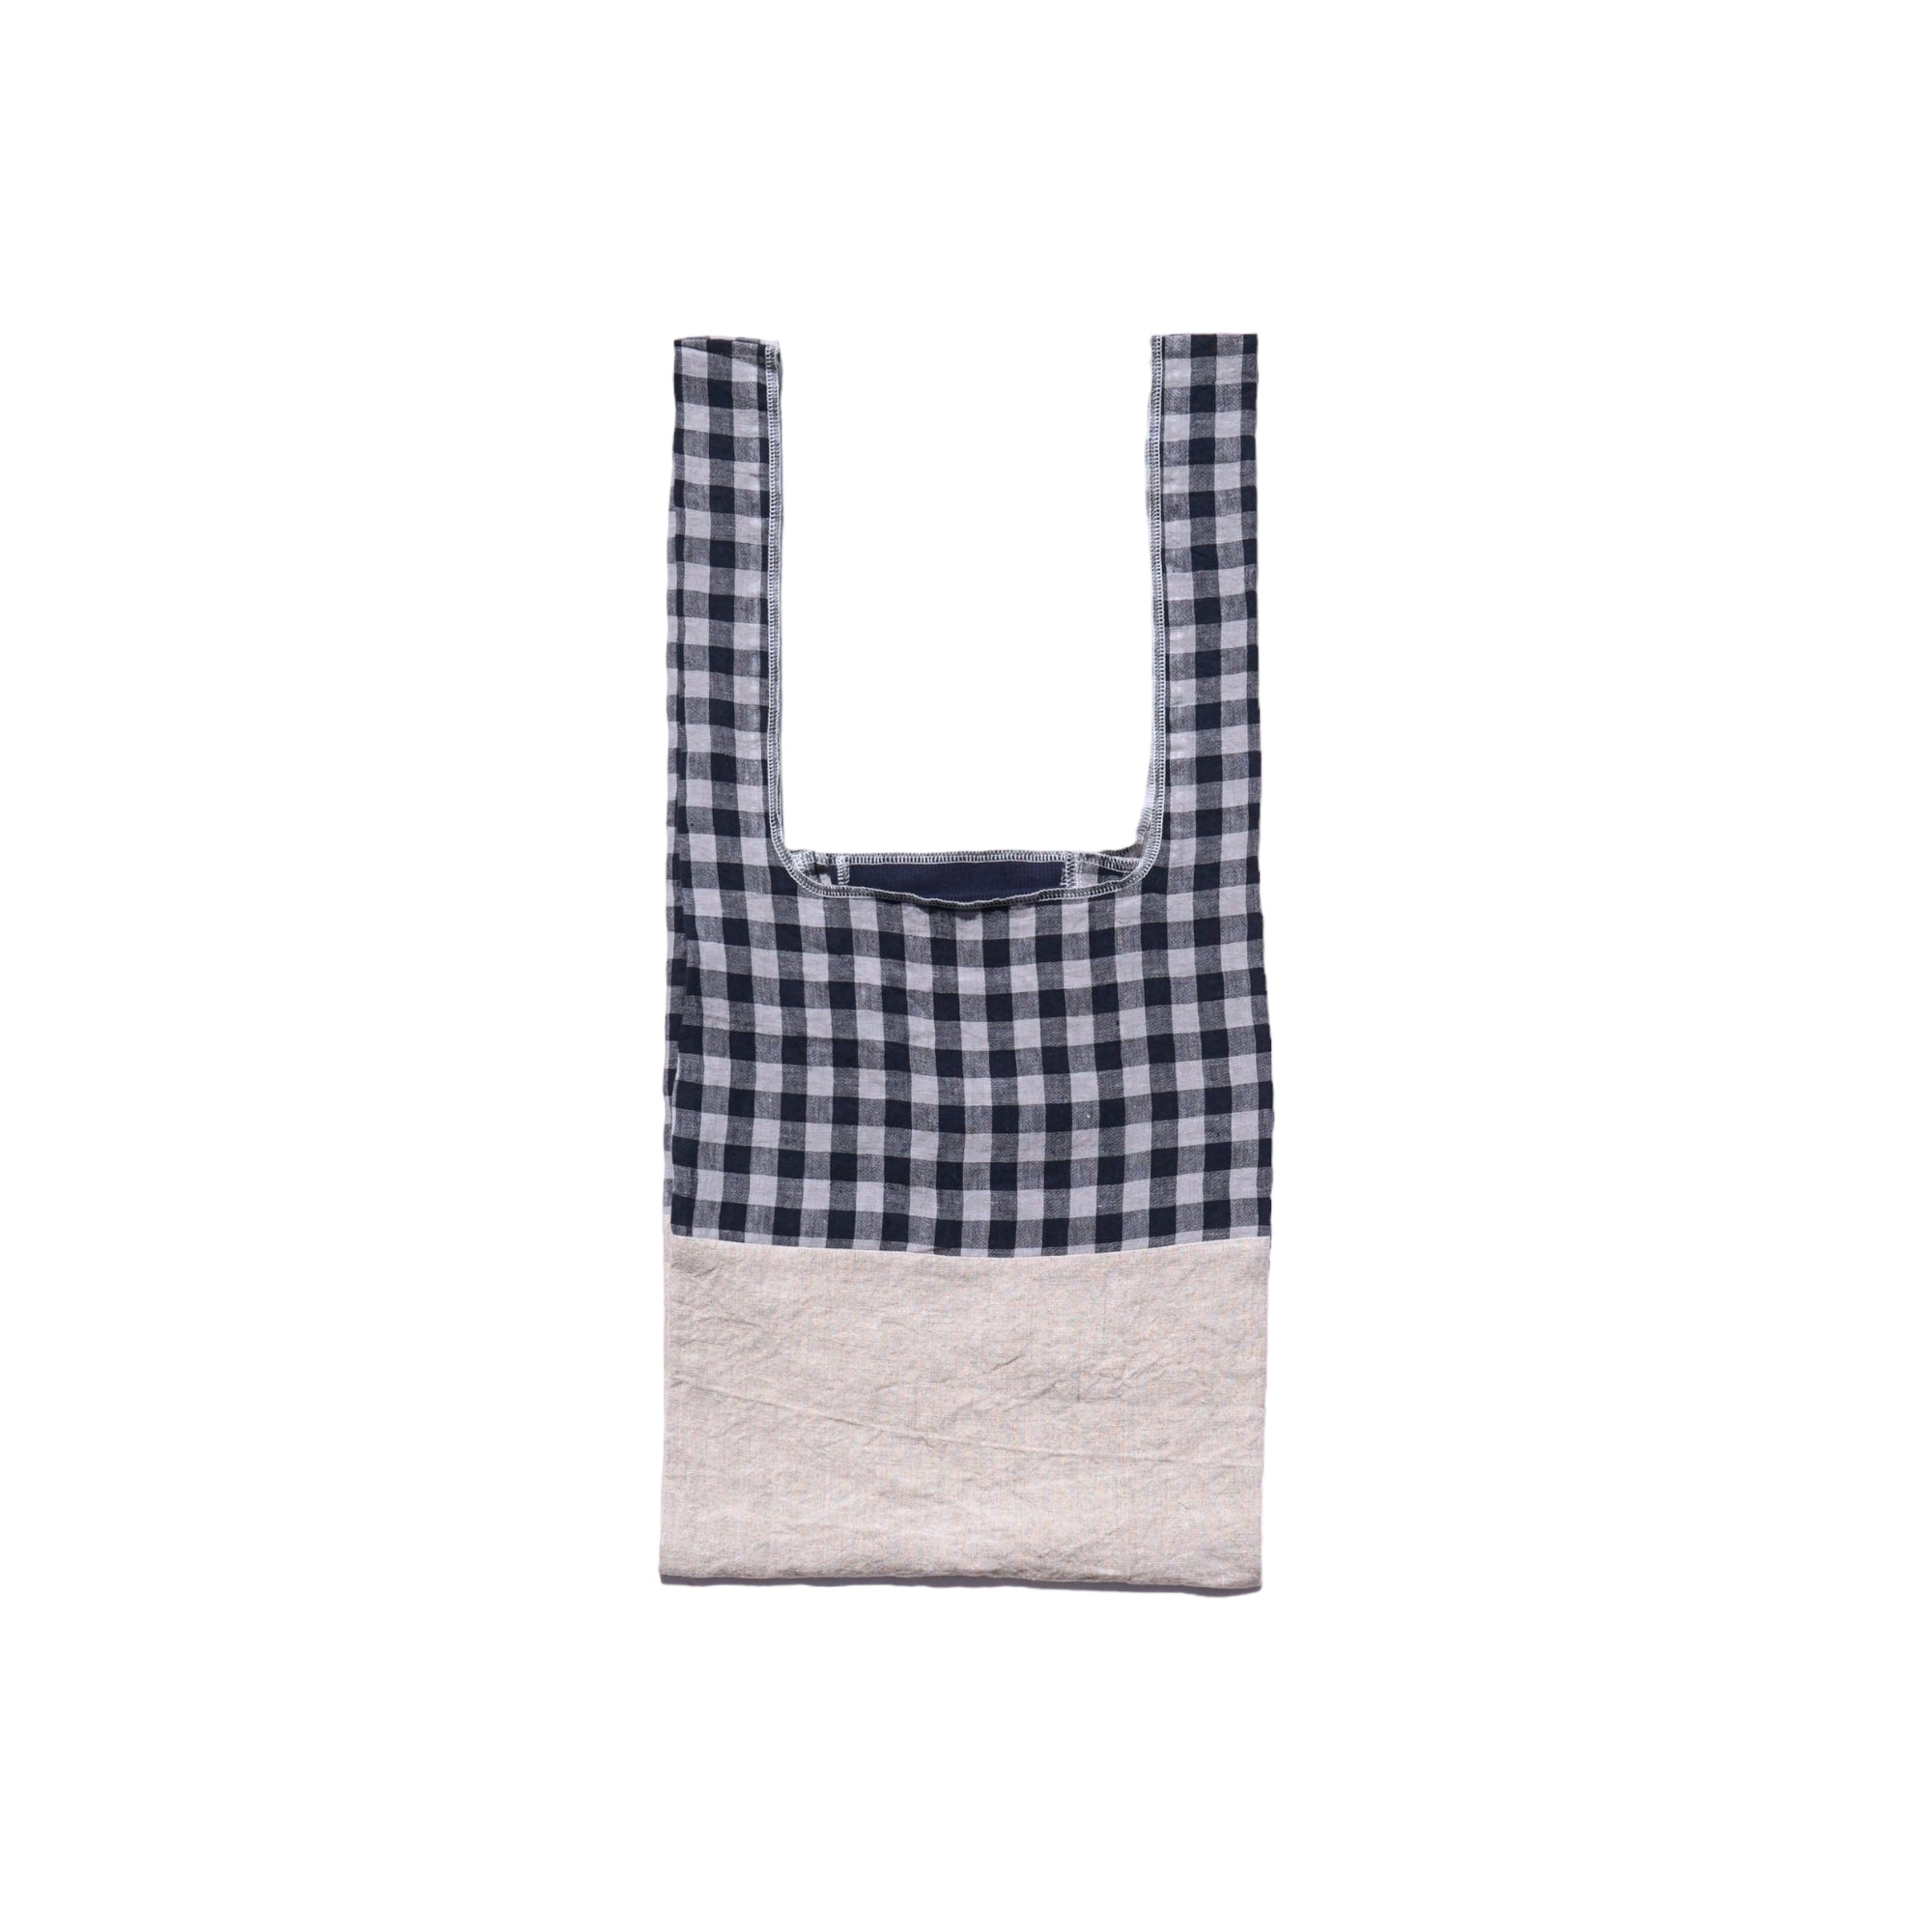 Cozy linen gingham×Washed linen / 202303ECO20